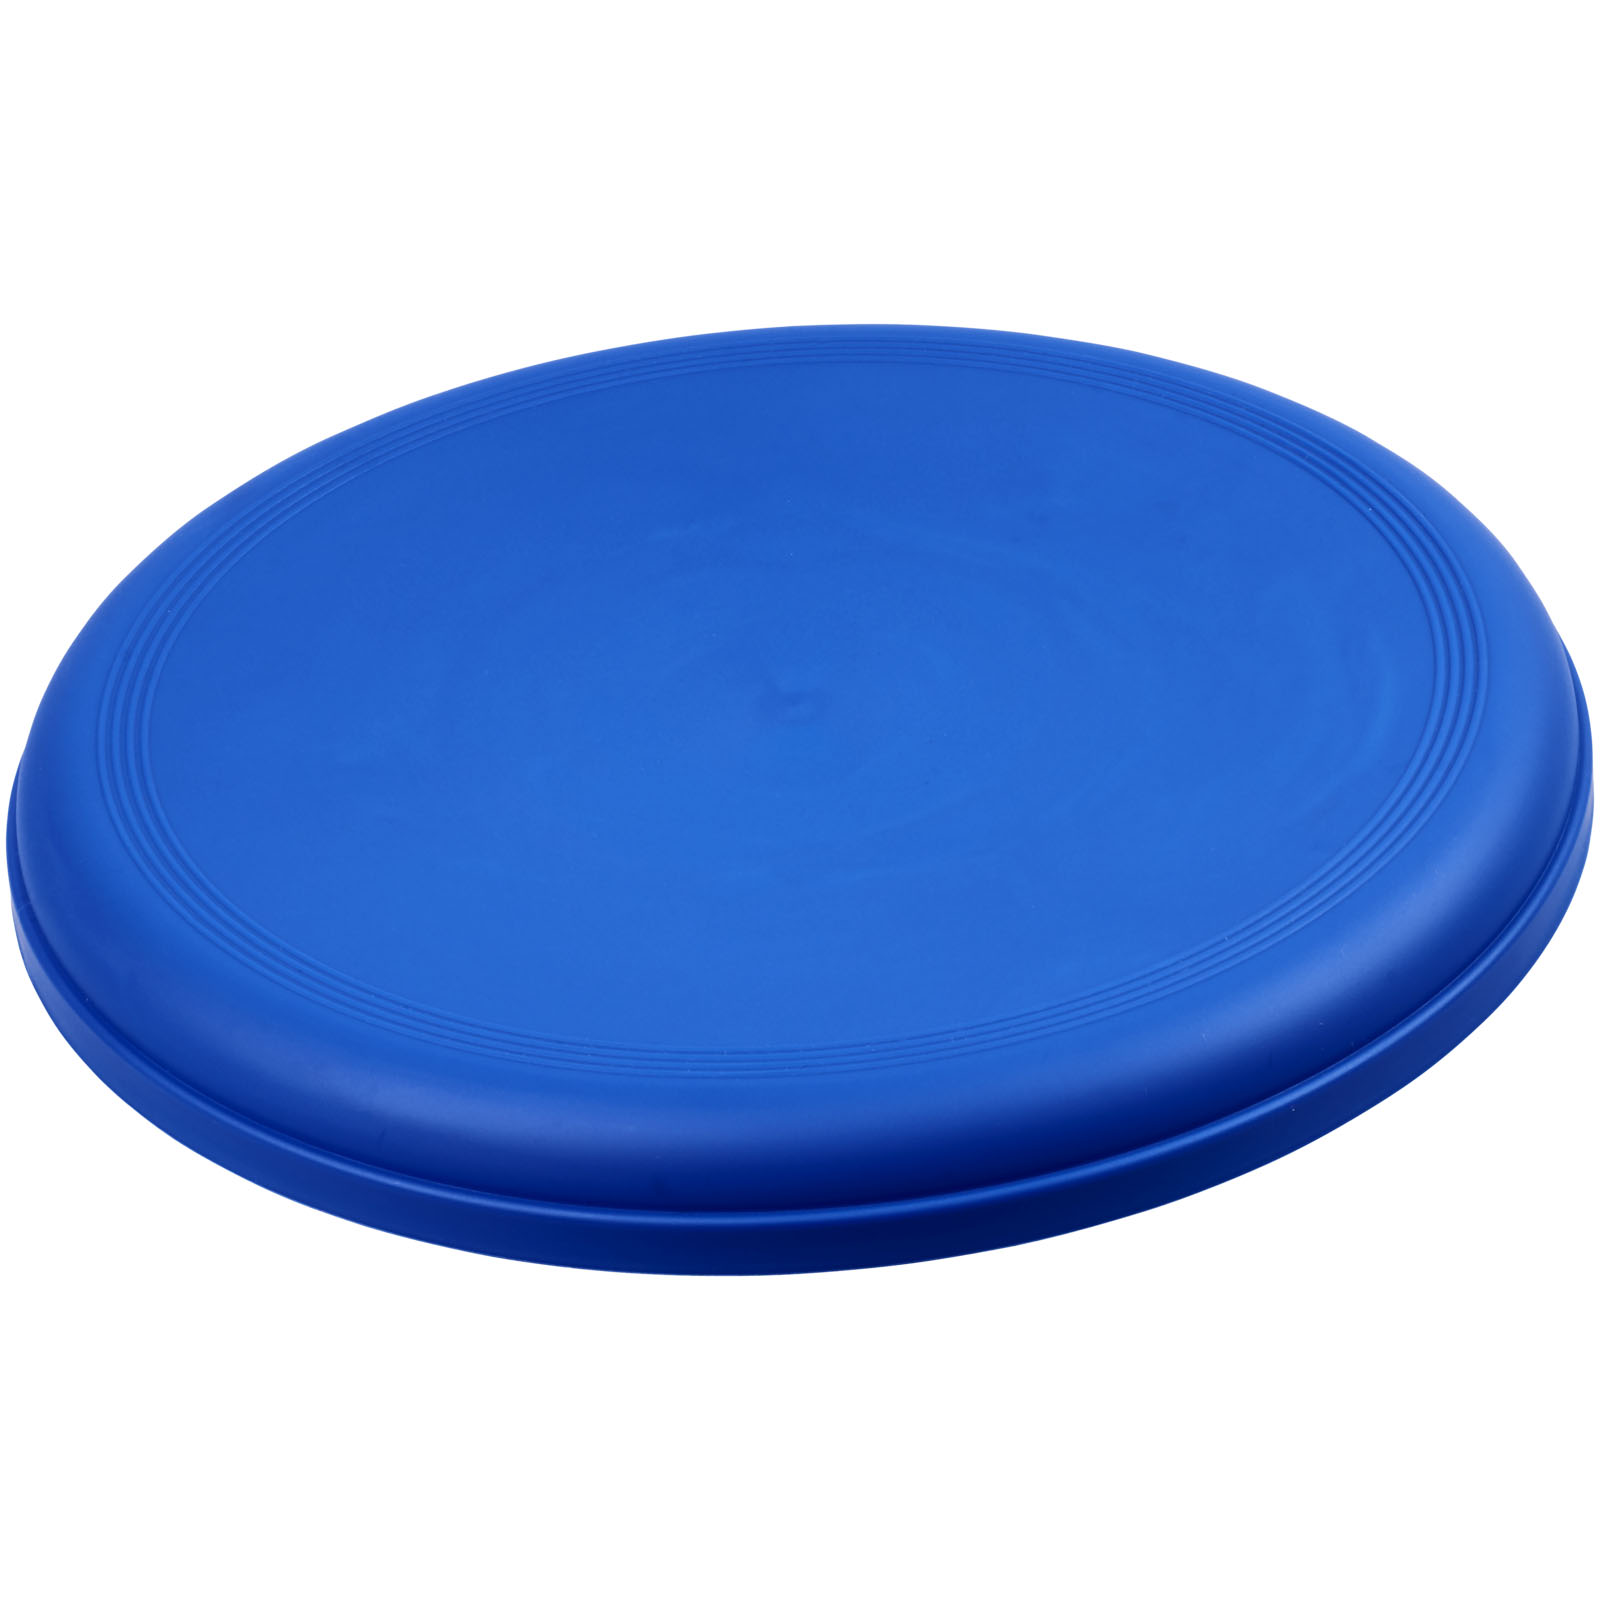 Advertising Outdoor Games - Max plastic dog frisbee